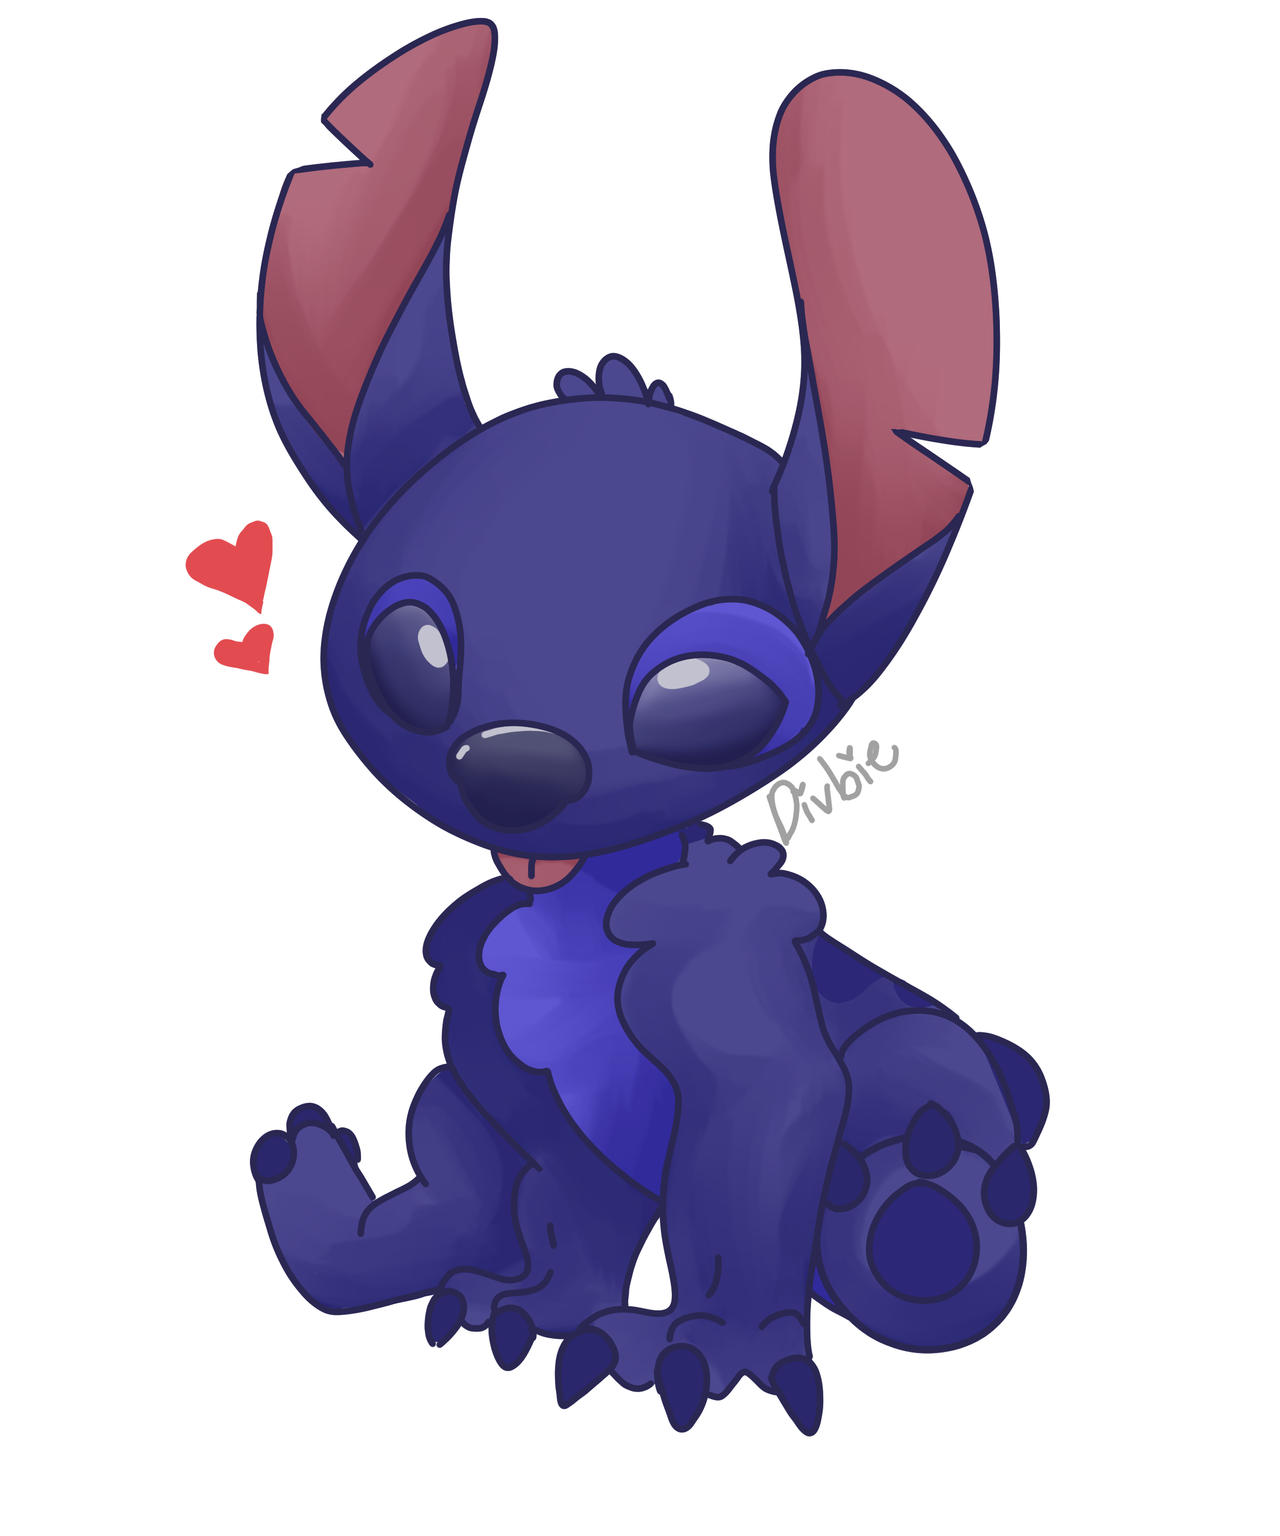 Here's A Stitch For Your Troubles ^^ by Divbiewashere on DeviantArt